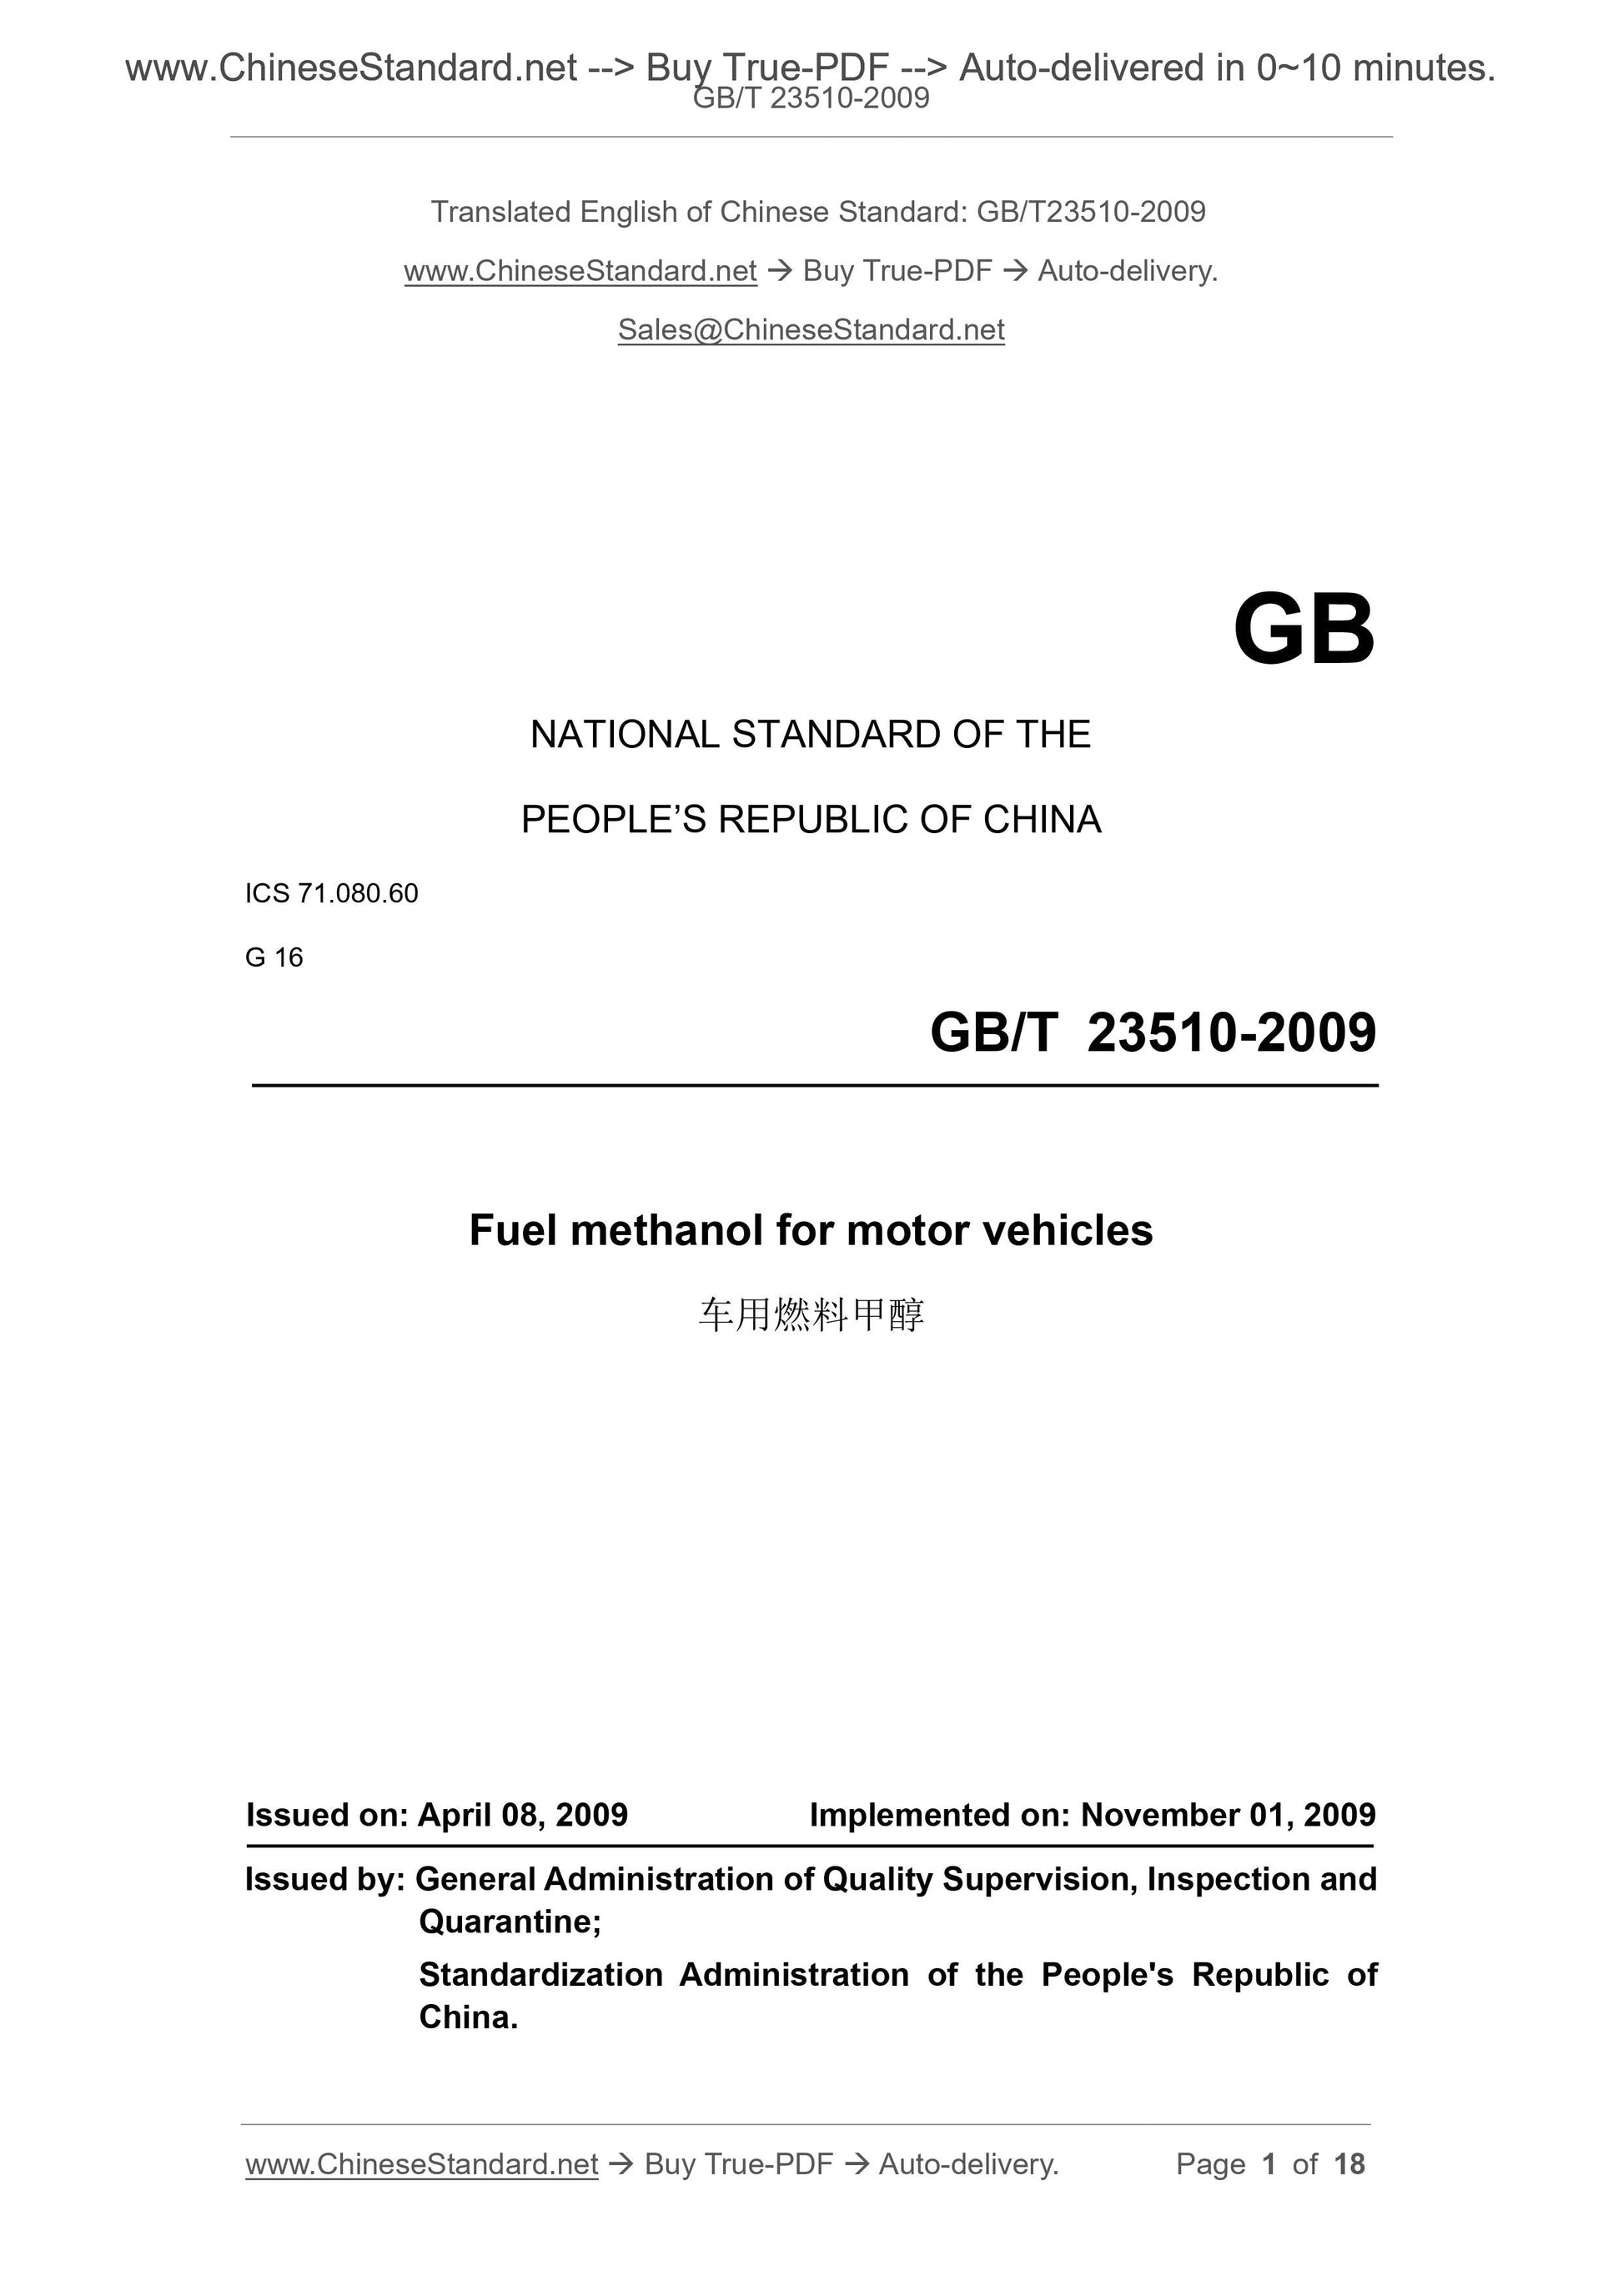 GB/T 23510-2009 Page 1